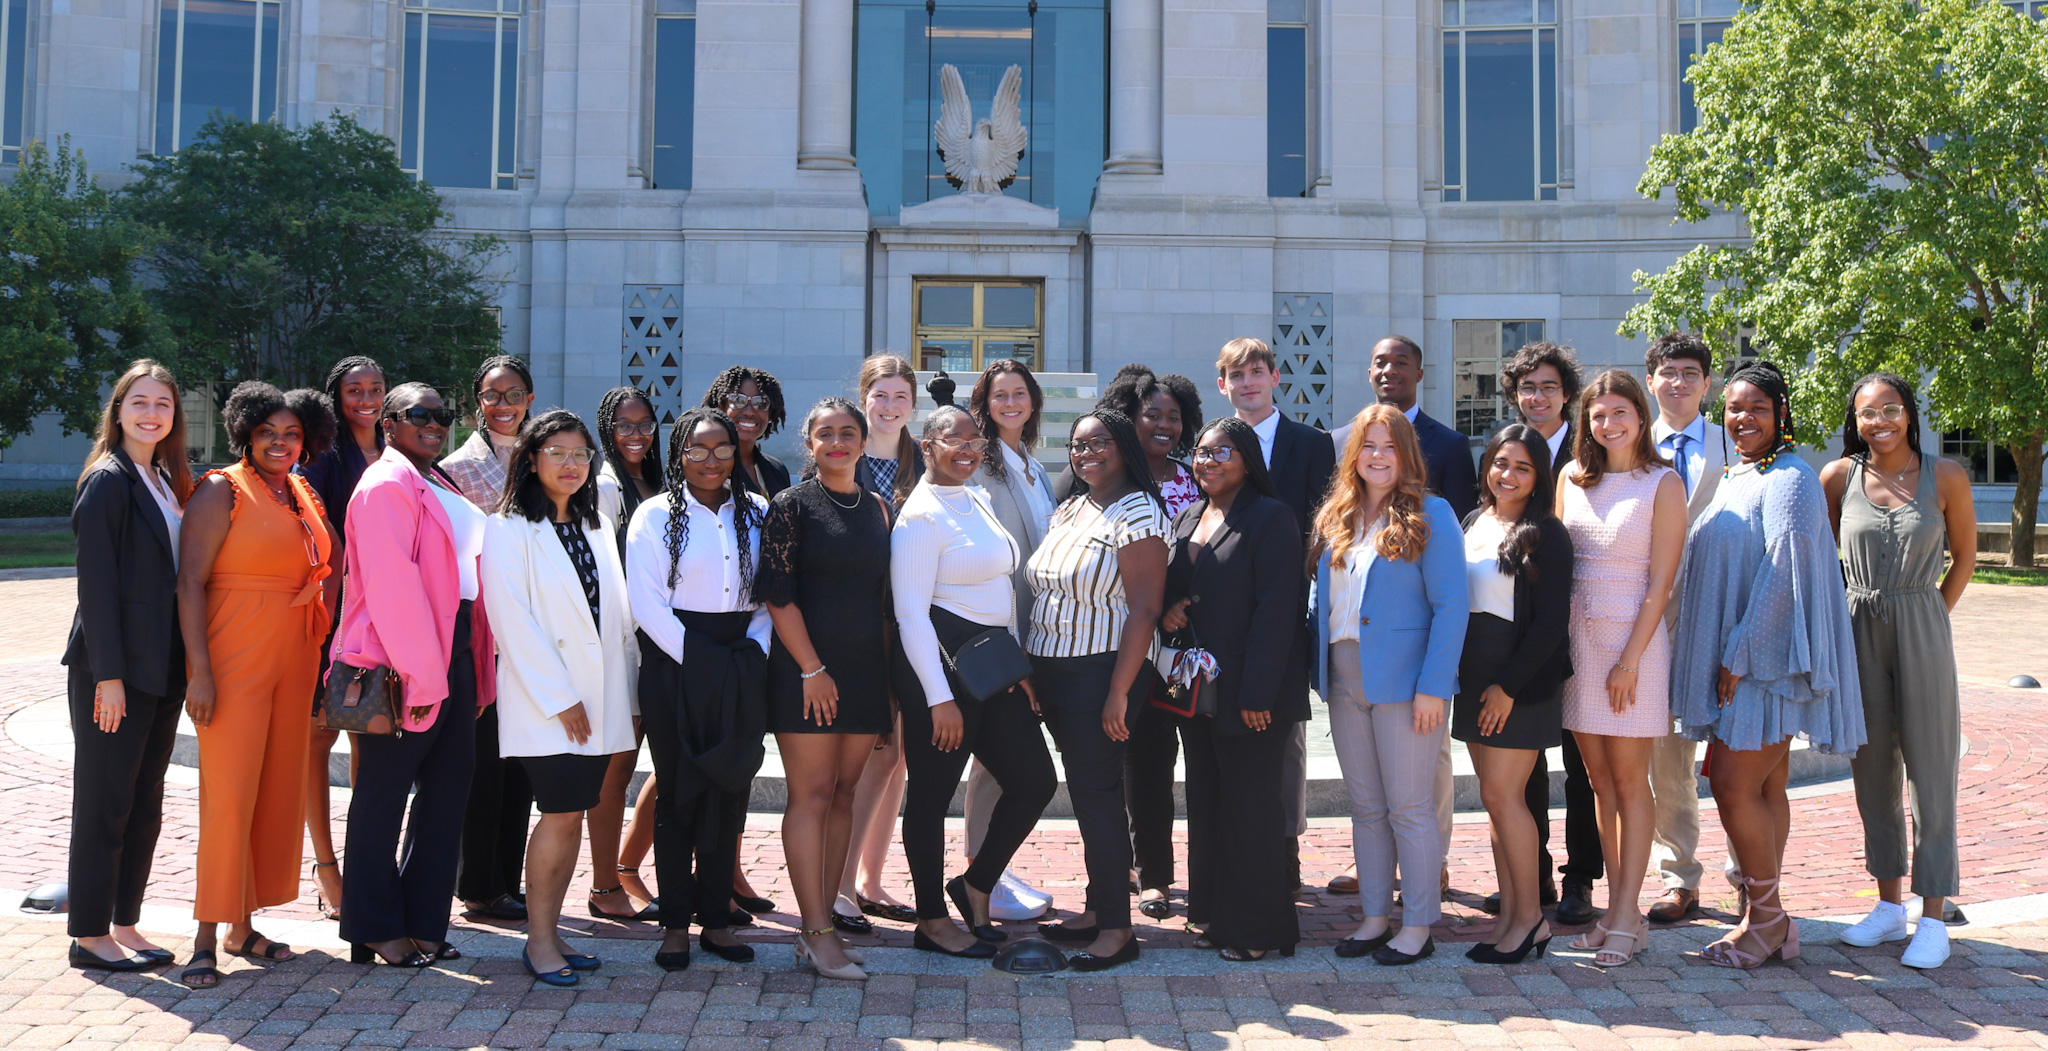 2022 Alabama Law Summer Scholars in front of the Frank M. Johnson Jr Federal Building in Montgomery